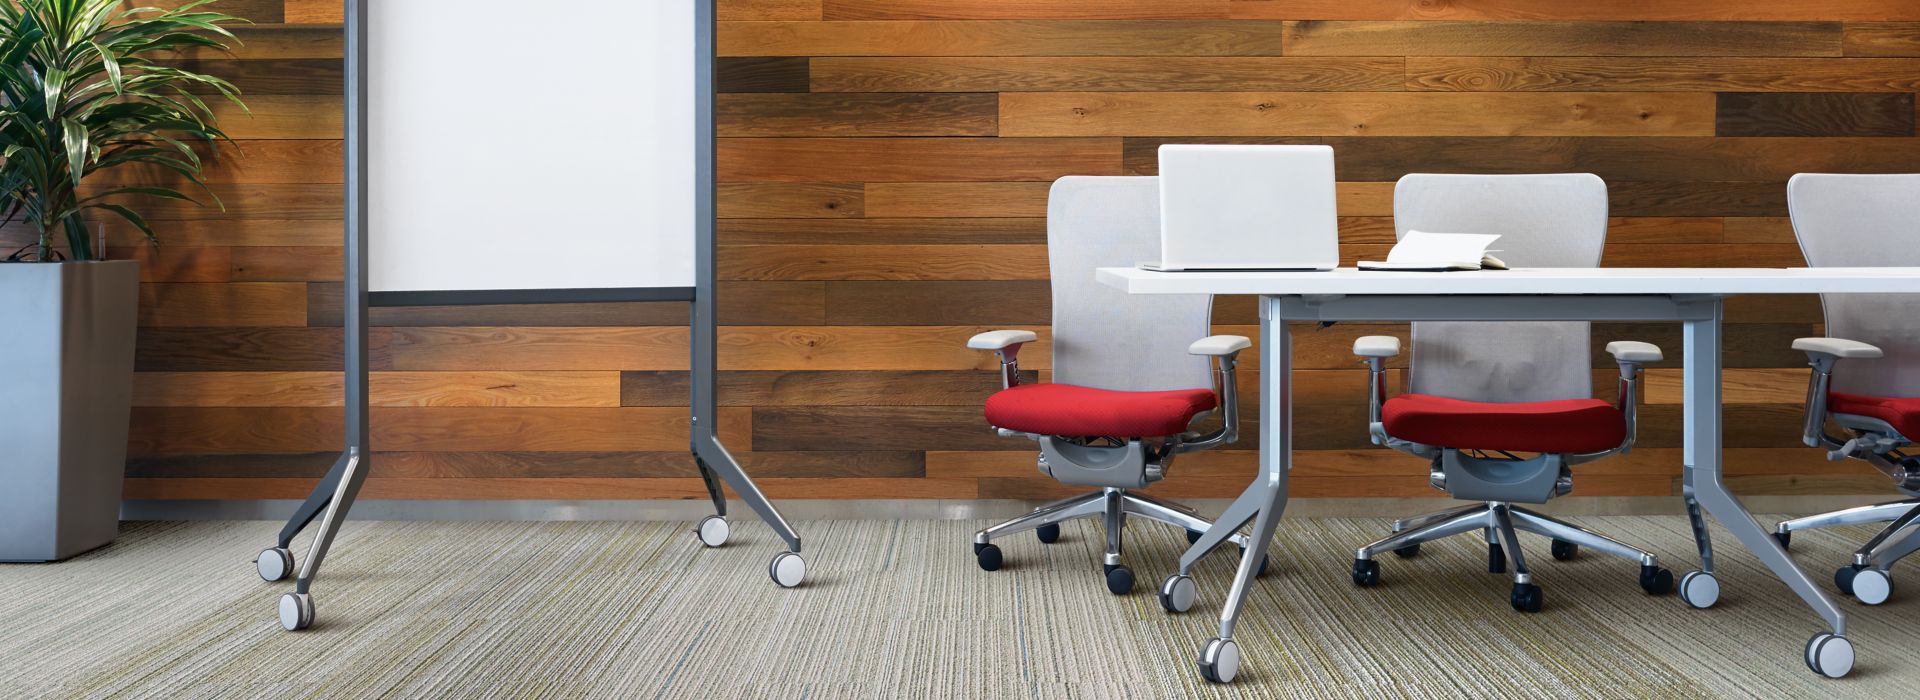 Interface SL920 plank carpet tile in meeting area with conference tables, chairs, white board and plant